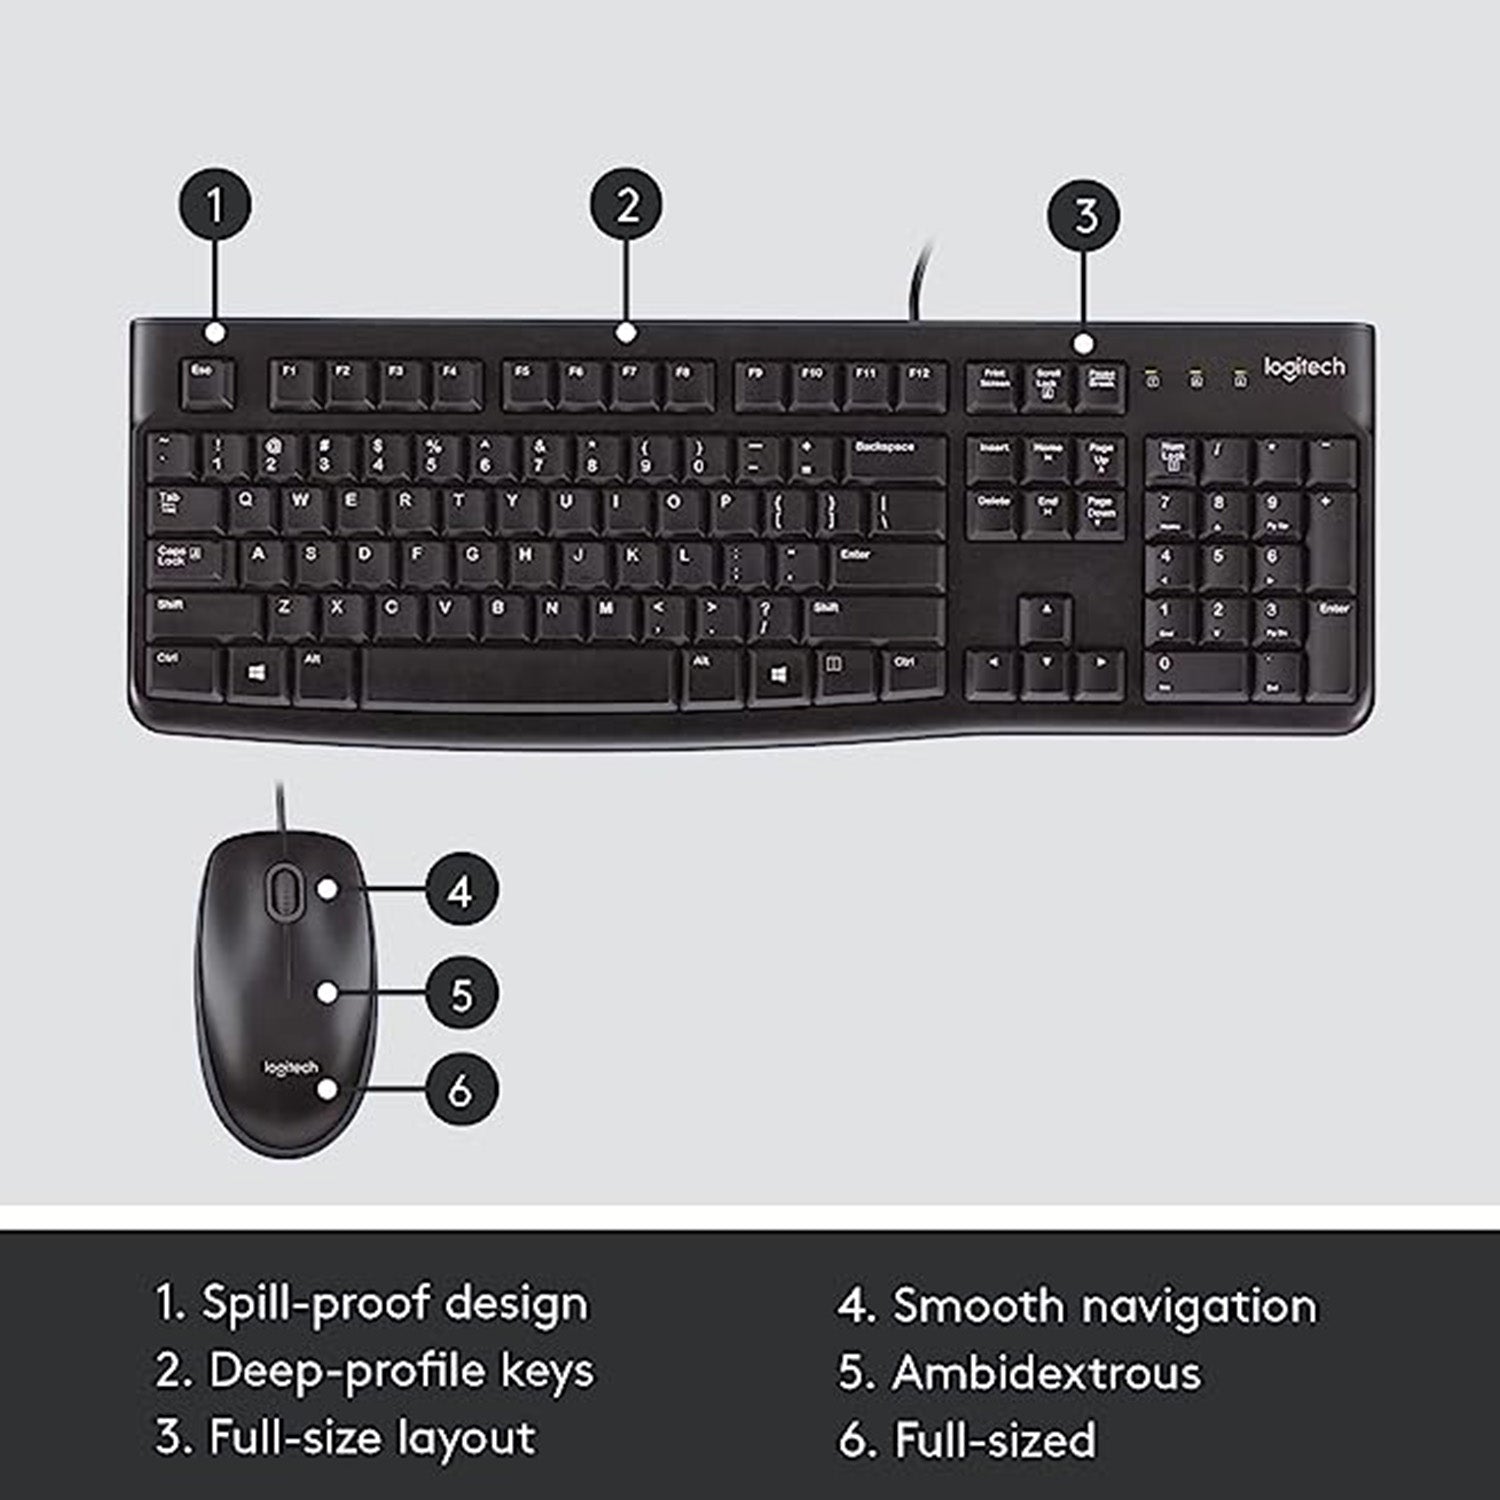 Logitech MK120 USB Keyboard and Mouse combo - Spill Resistant Design, Optical mouse, USB Plug-and-Play, Compatible with PC & Laptop (920-002565)